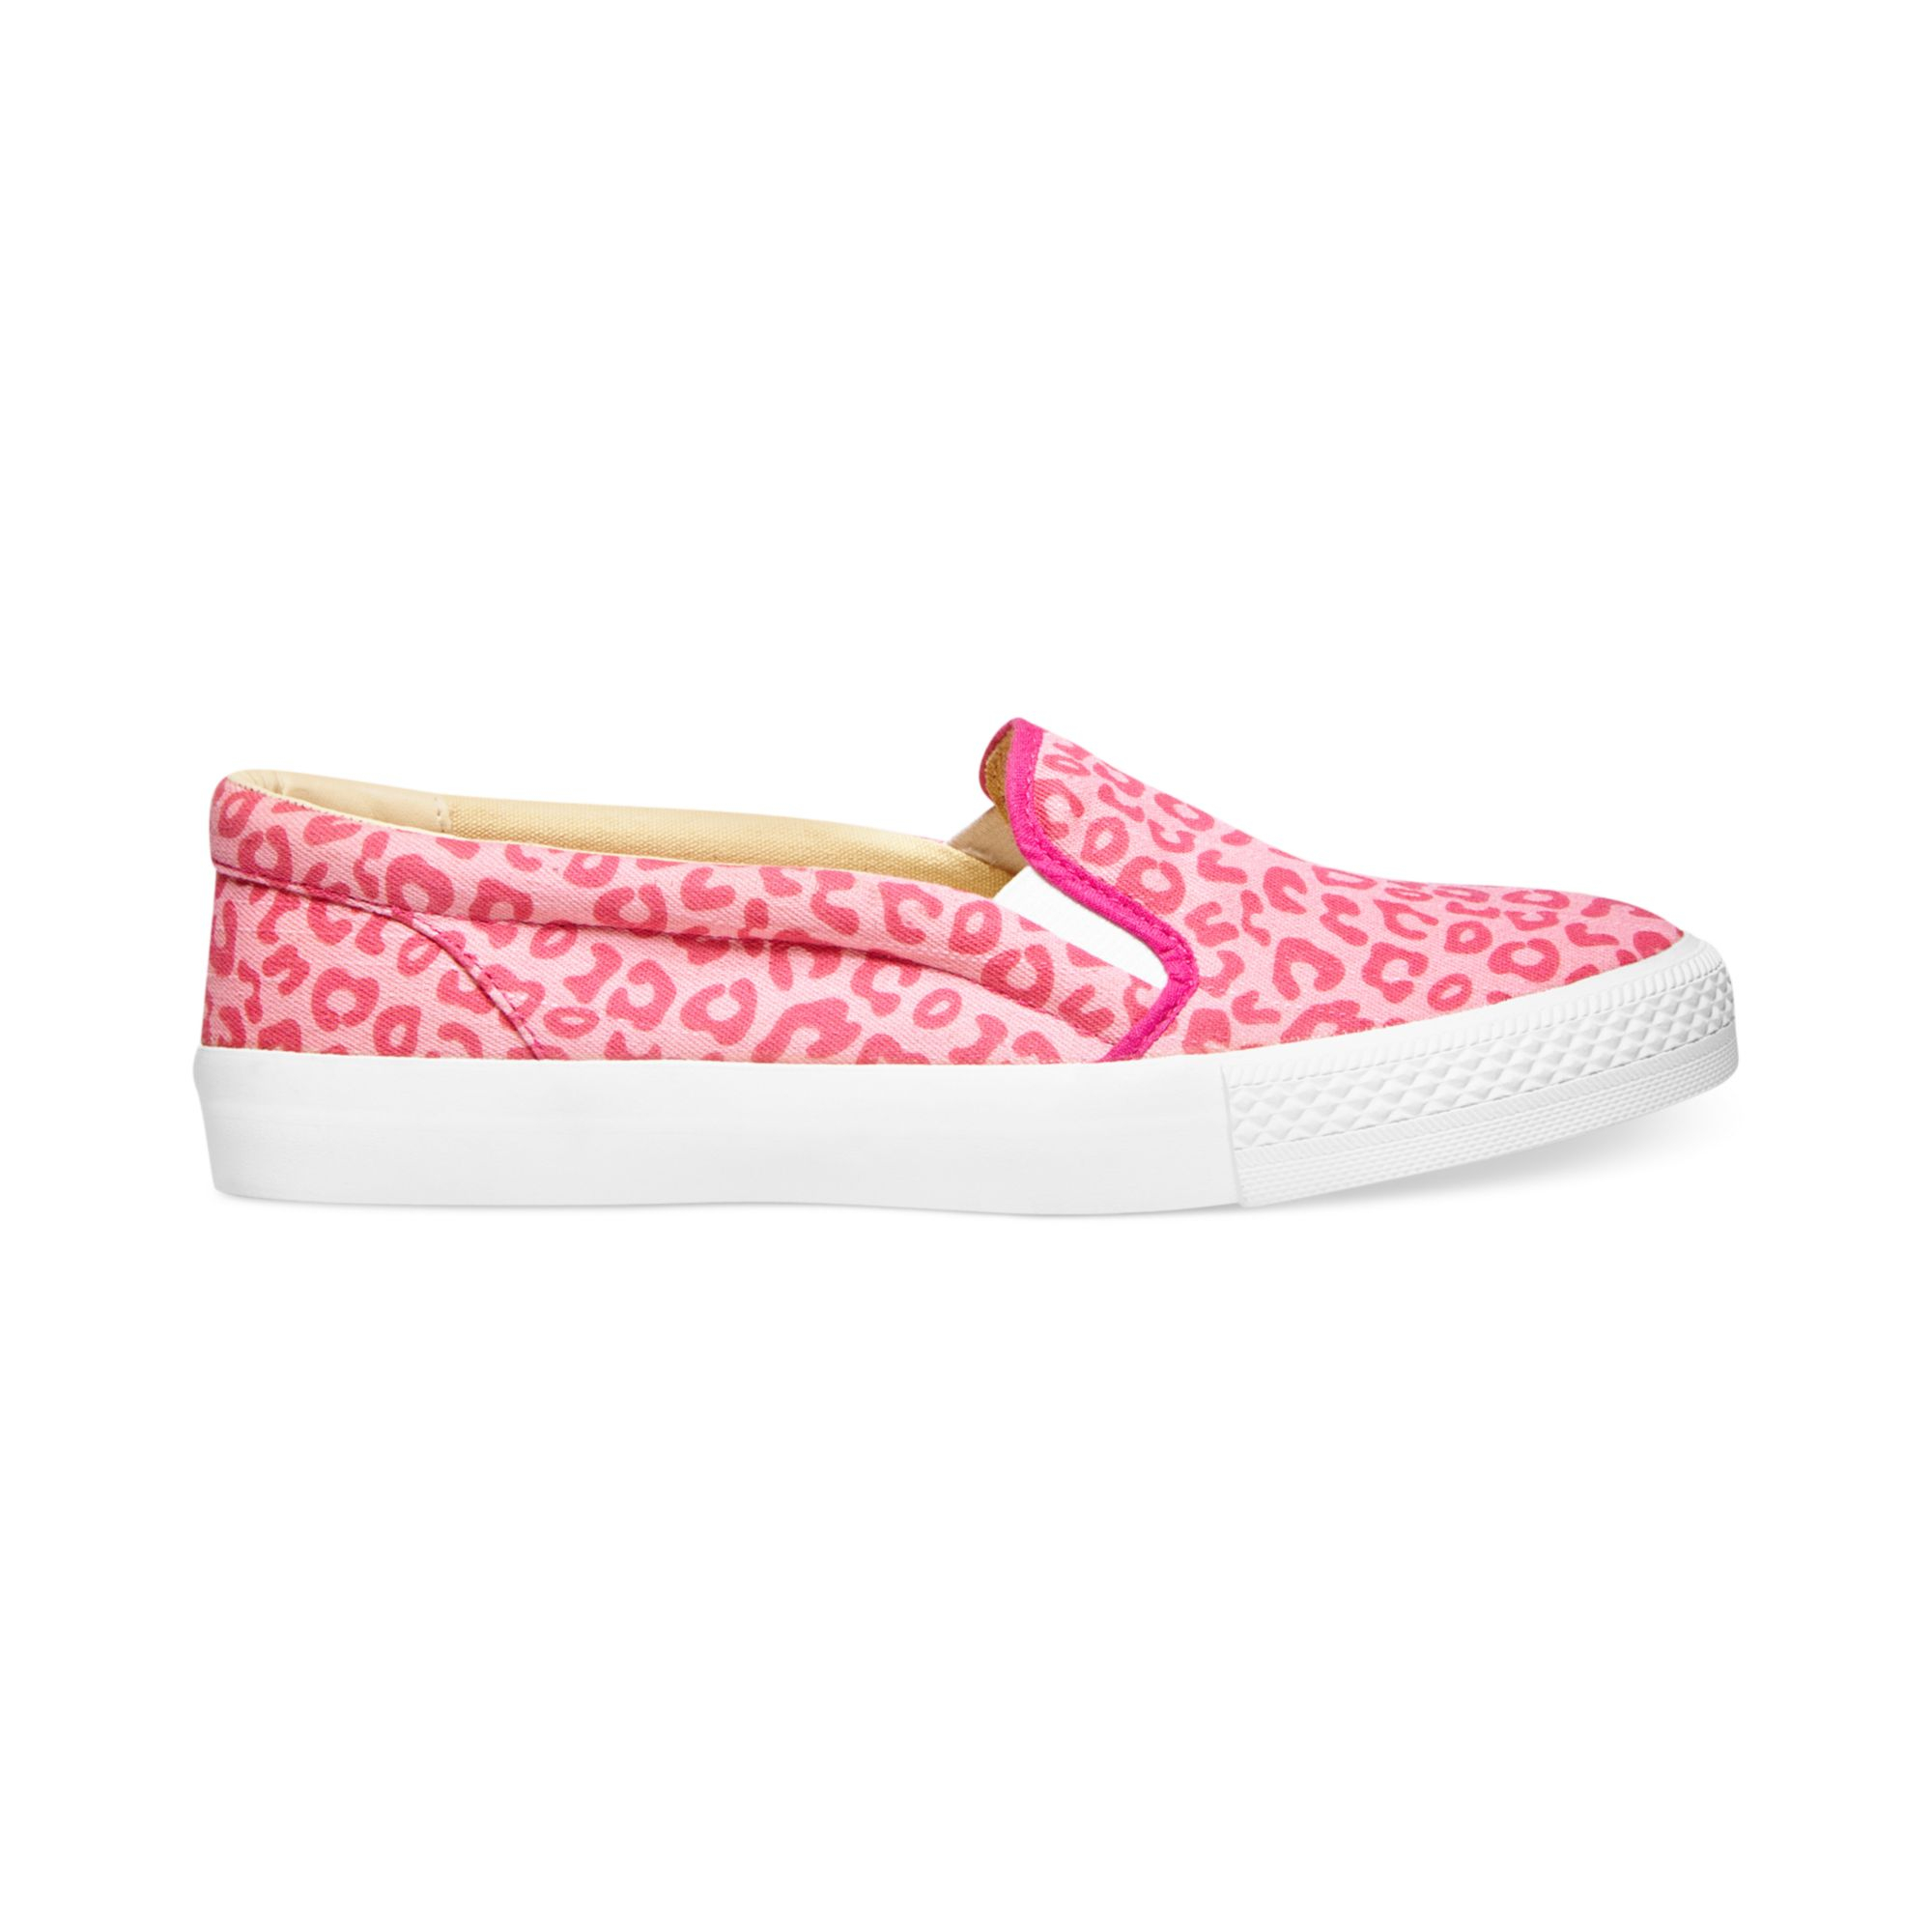 Lyst - Betsey Johnson Amira Sneakers in Pink